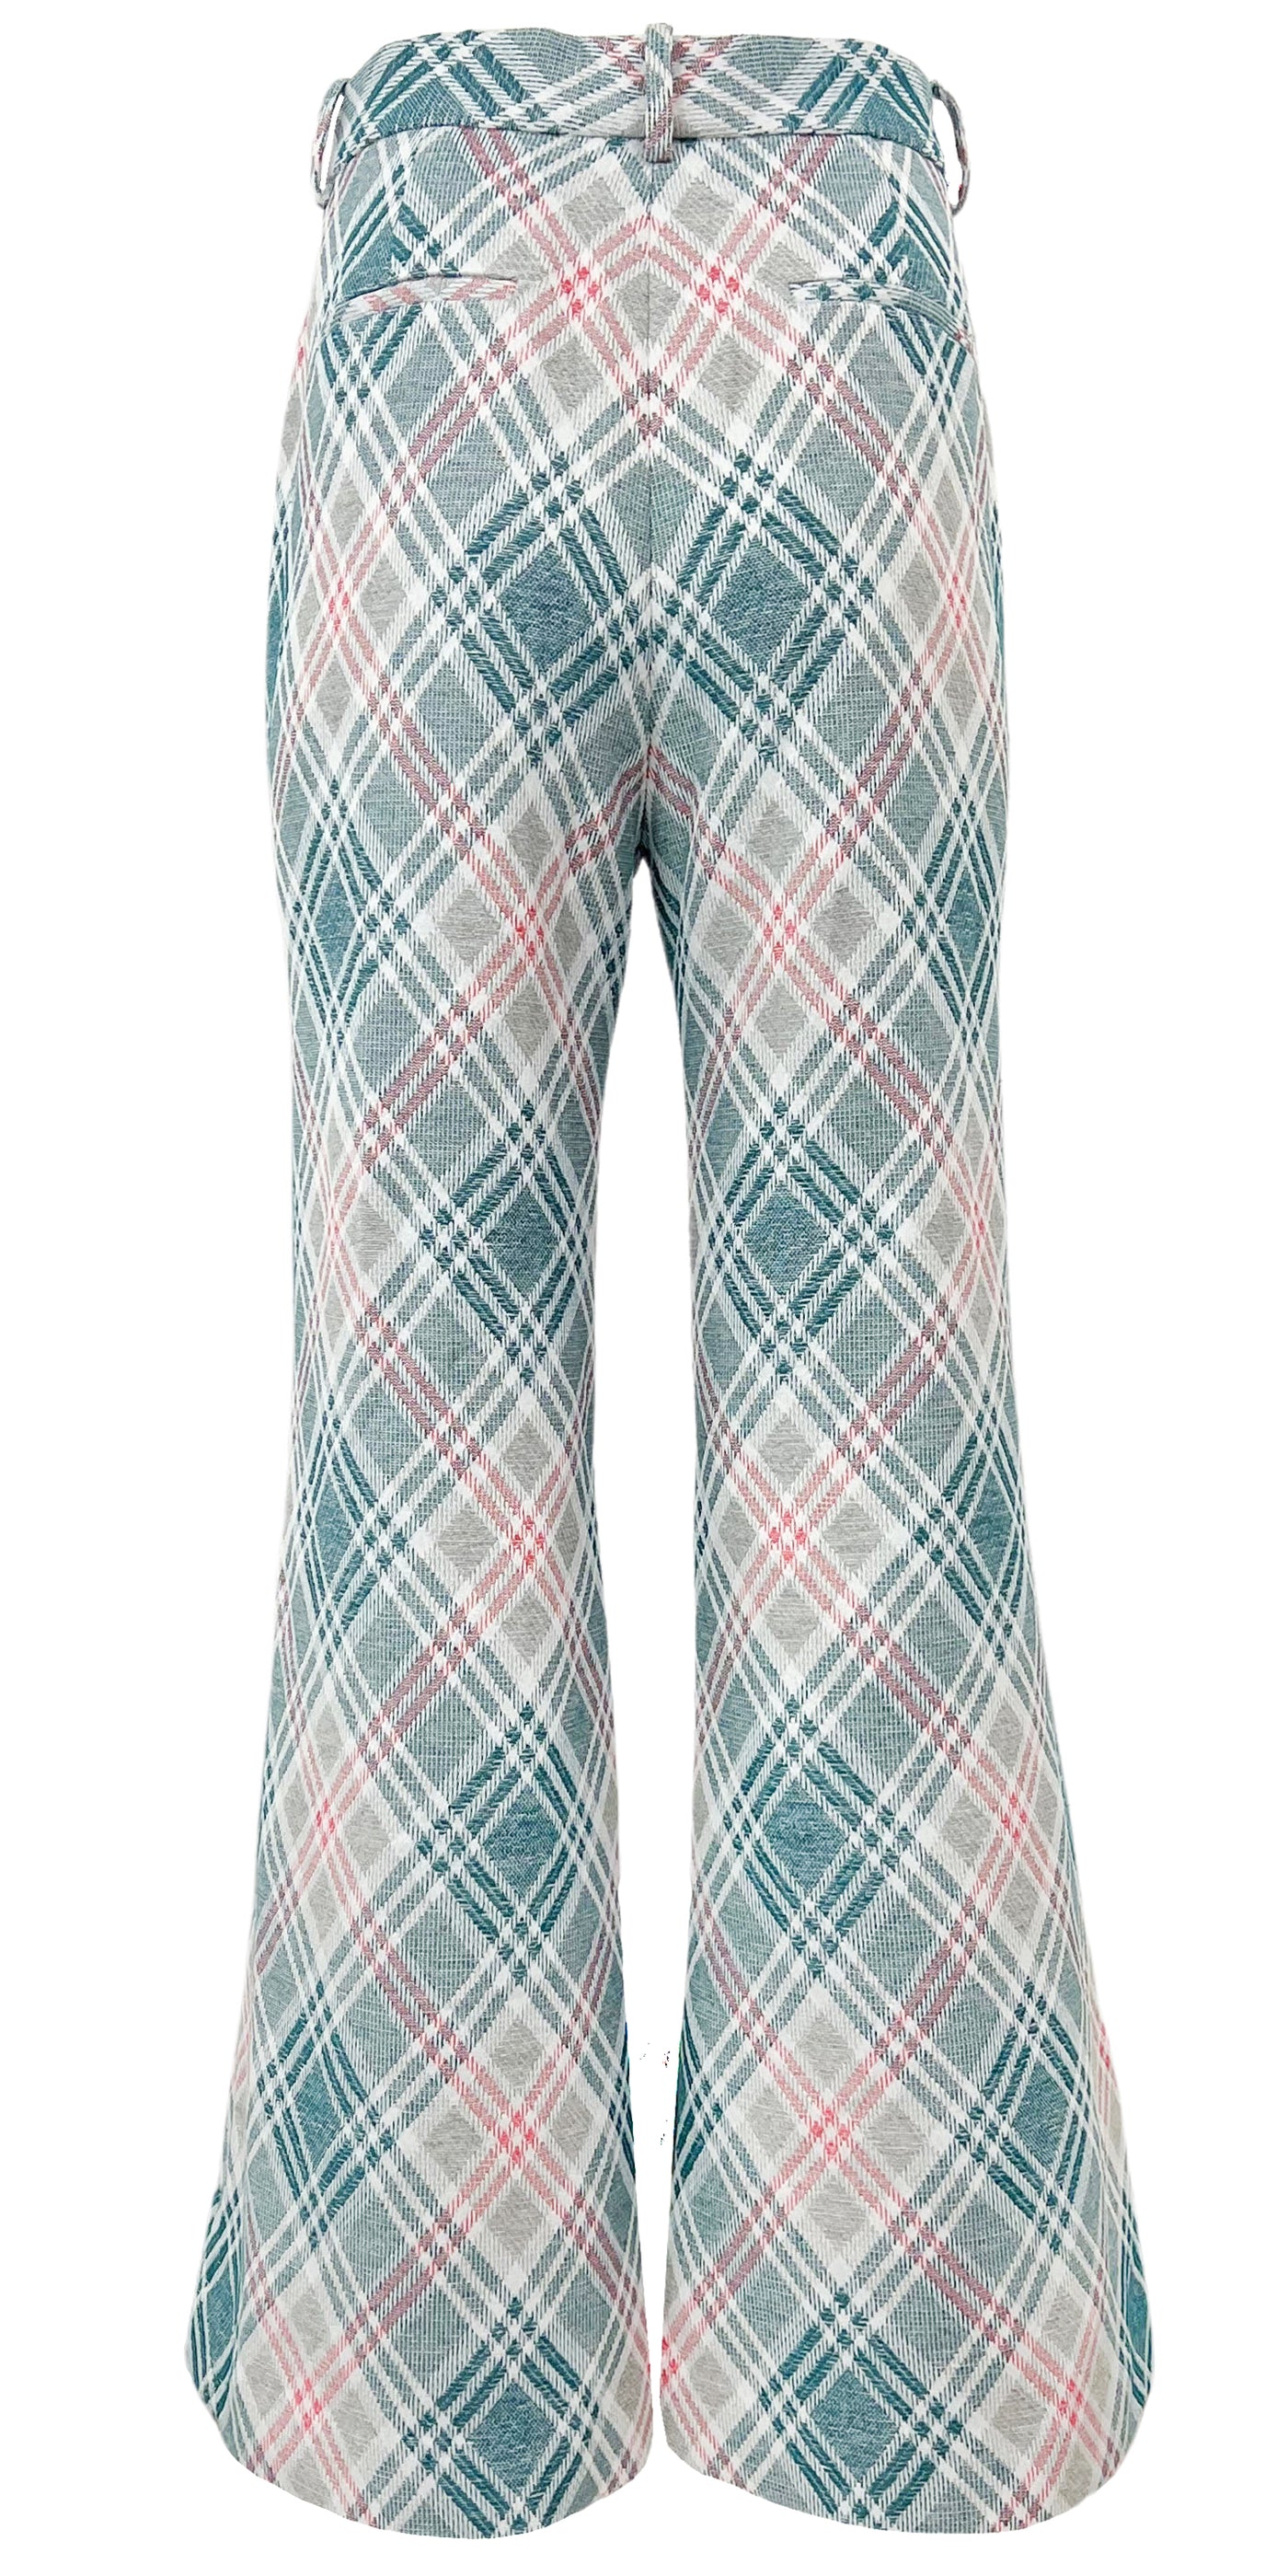 Rosie Assoulin Plaid Print Trousers in Multi - Discounts on Rosie Assoulin at UAL